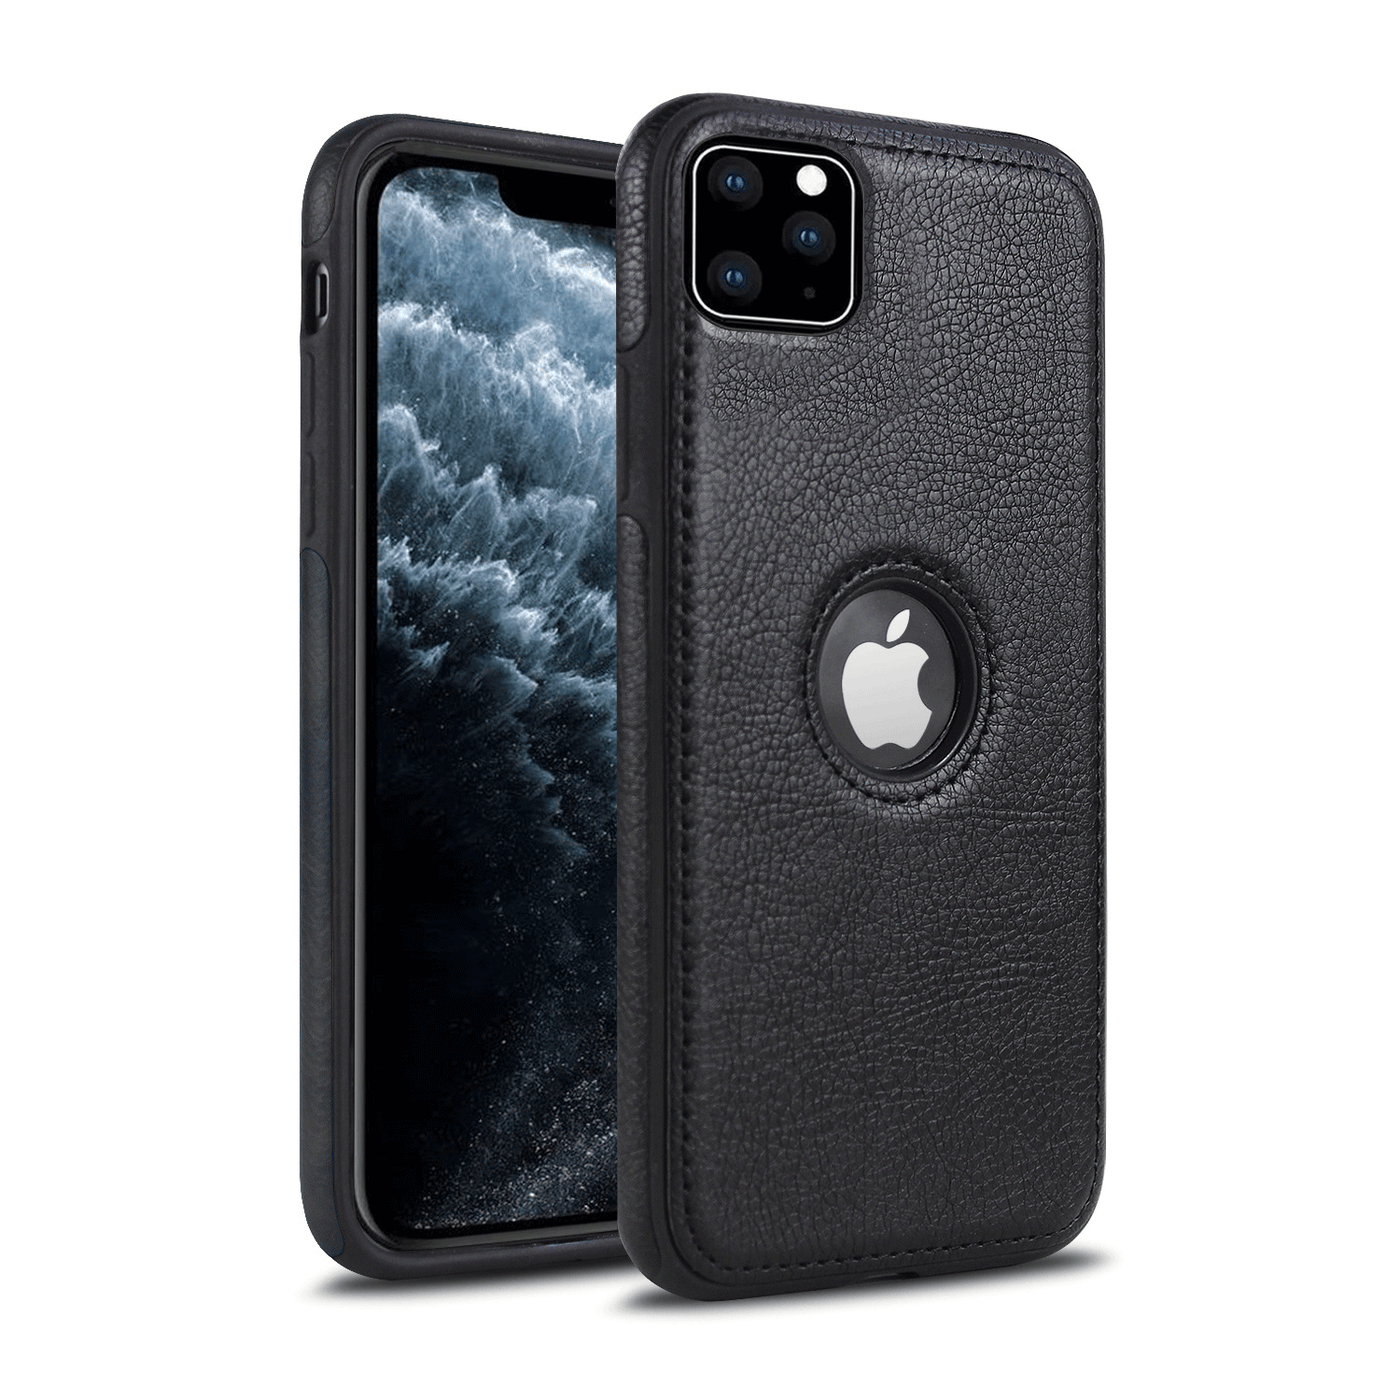 Excelsior Premium PU Leather Back Cover case For Apple iPhone 11 Pro